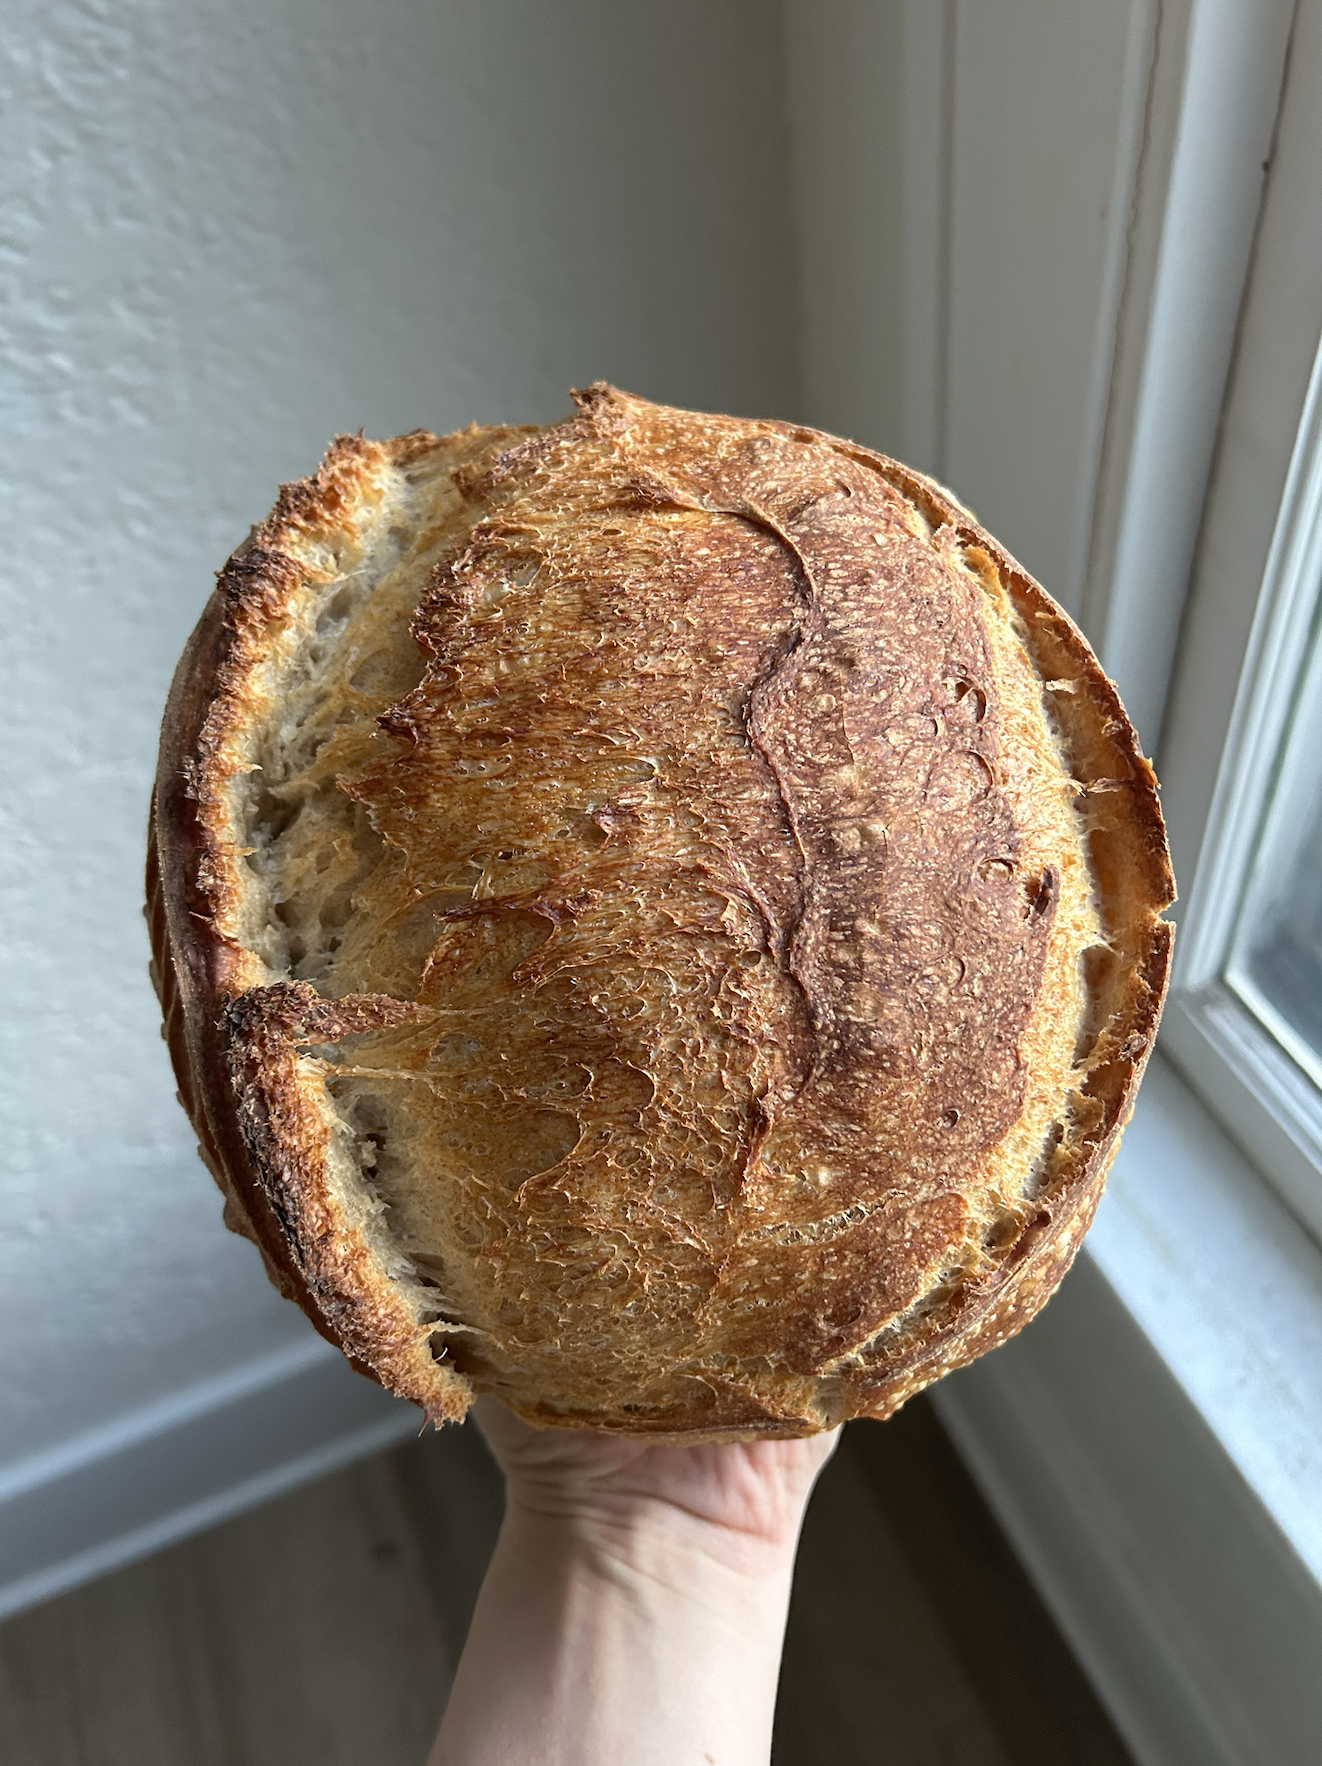 sourdough bread instagram influencer aurora illinois united states sourdough bread for sale local loaves of bread from @littlepearlbreads 98310